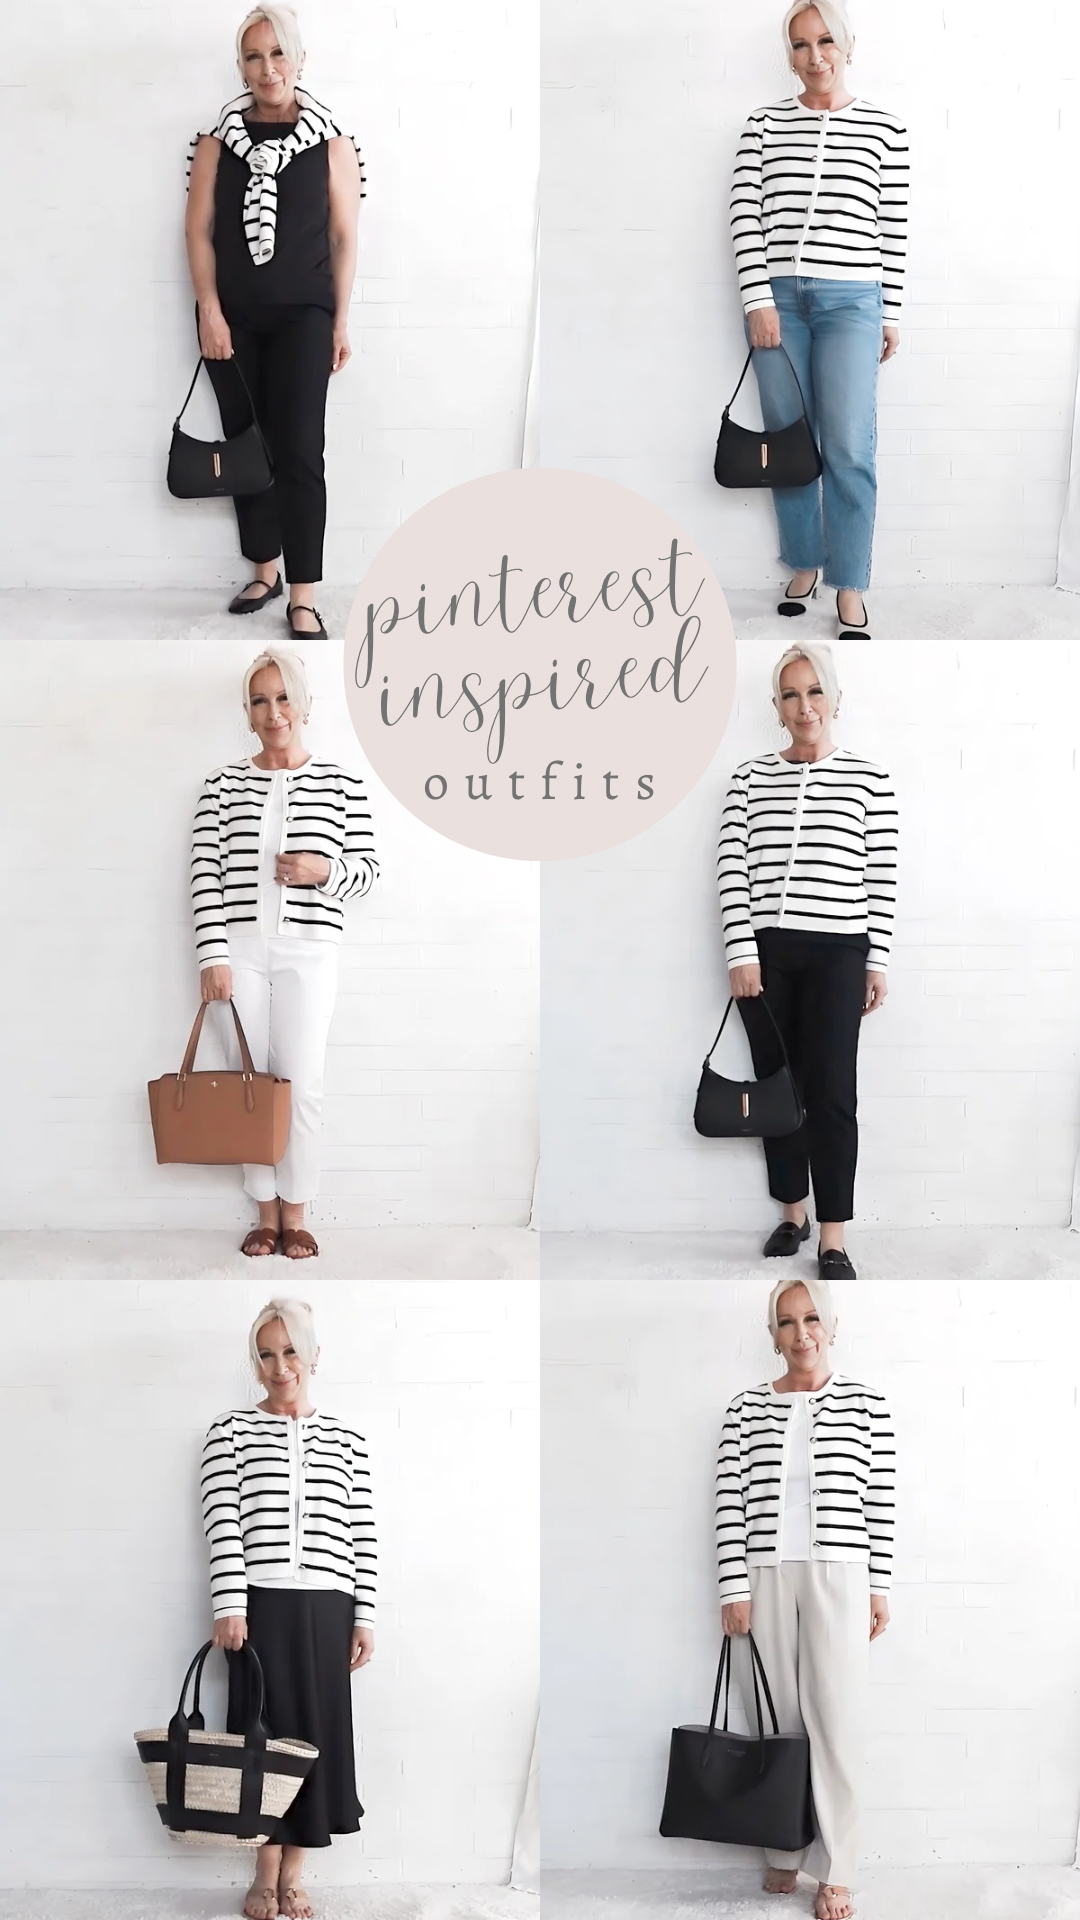 Pinterest Inspired Outfits for Midlife Women: Striped Lady Coat Cardigan